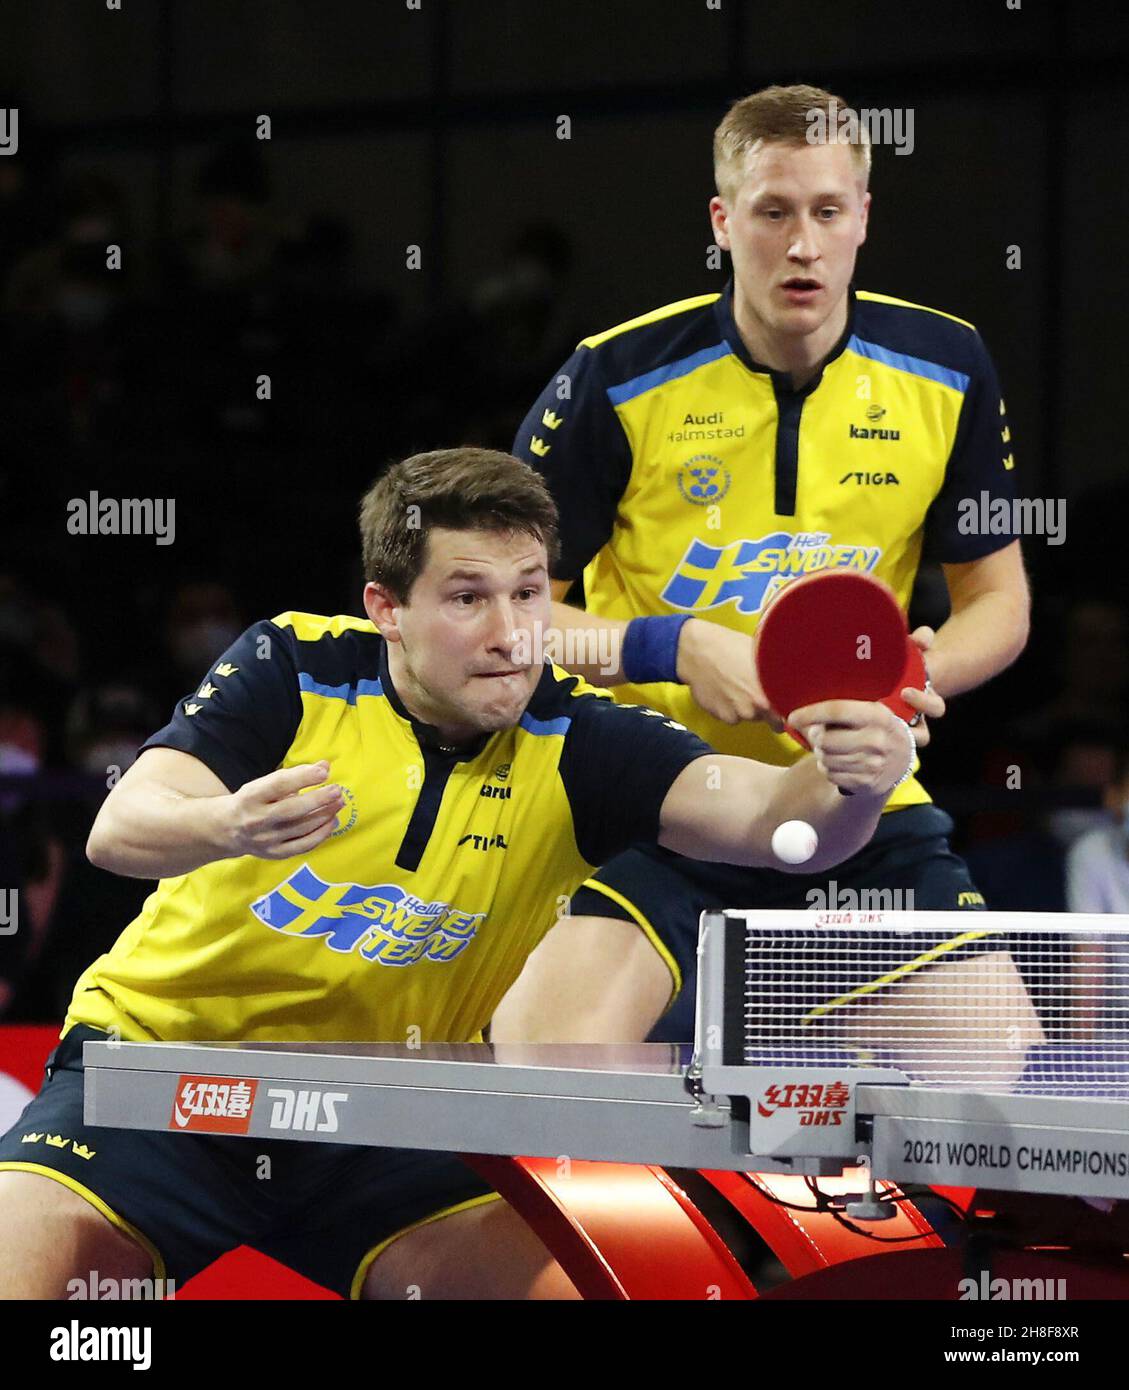 Sweden's Kristian Karlsson (L) and Mattias Falck play in the men's doubles  final at the table tennis world championships in Houston on Nov. 29, 2021.  (Kyodo)==Kyodo Photo via Credit: Newscom/Alamy Live News